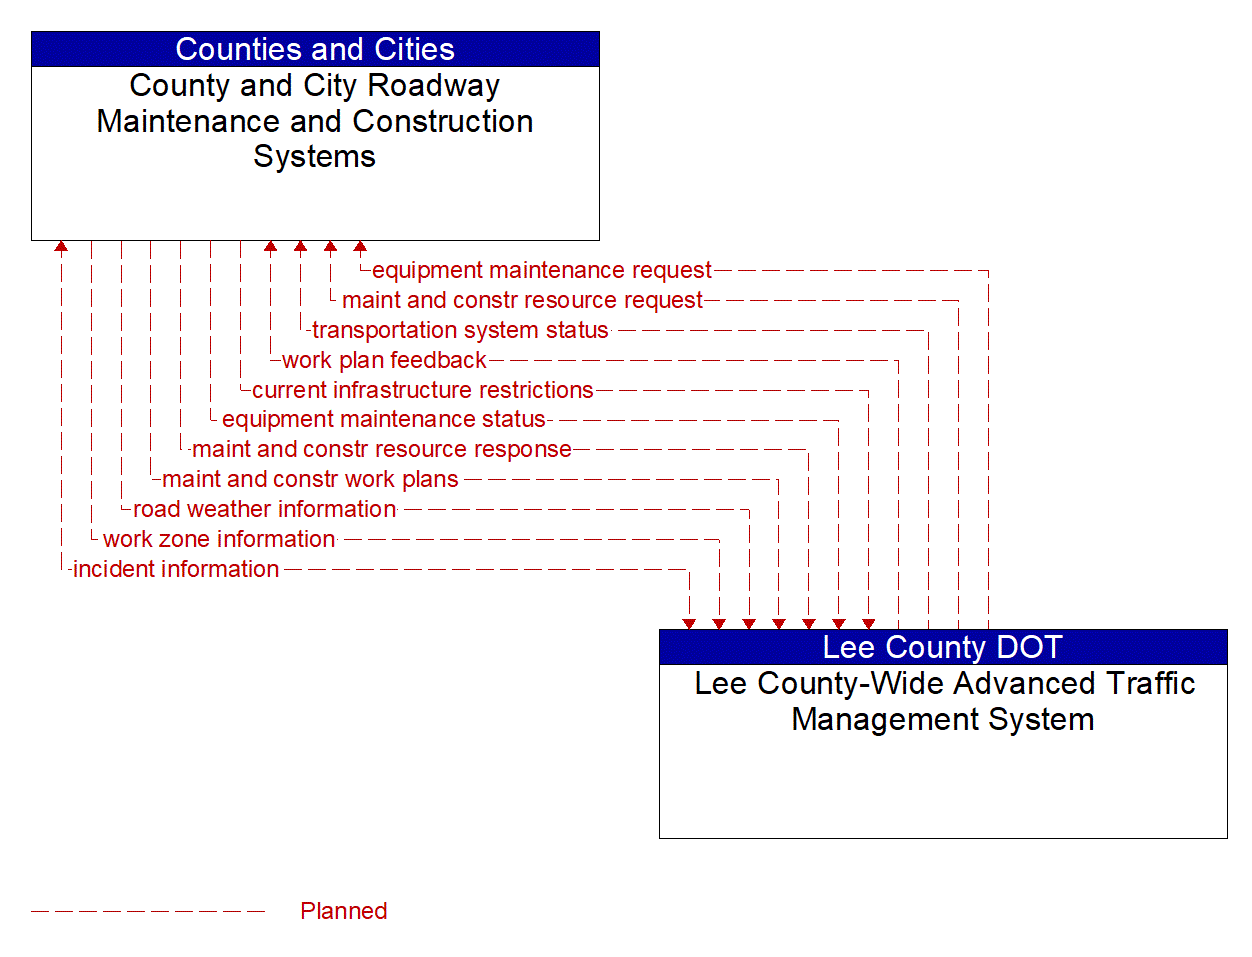 Architecture Flow Diagram: Lee County-Wide Advanced Traffic Management System <--> County and City Roadway Maintenance and Construction Systems